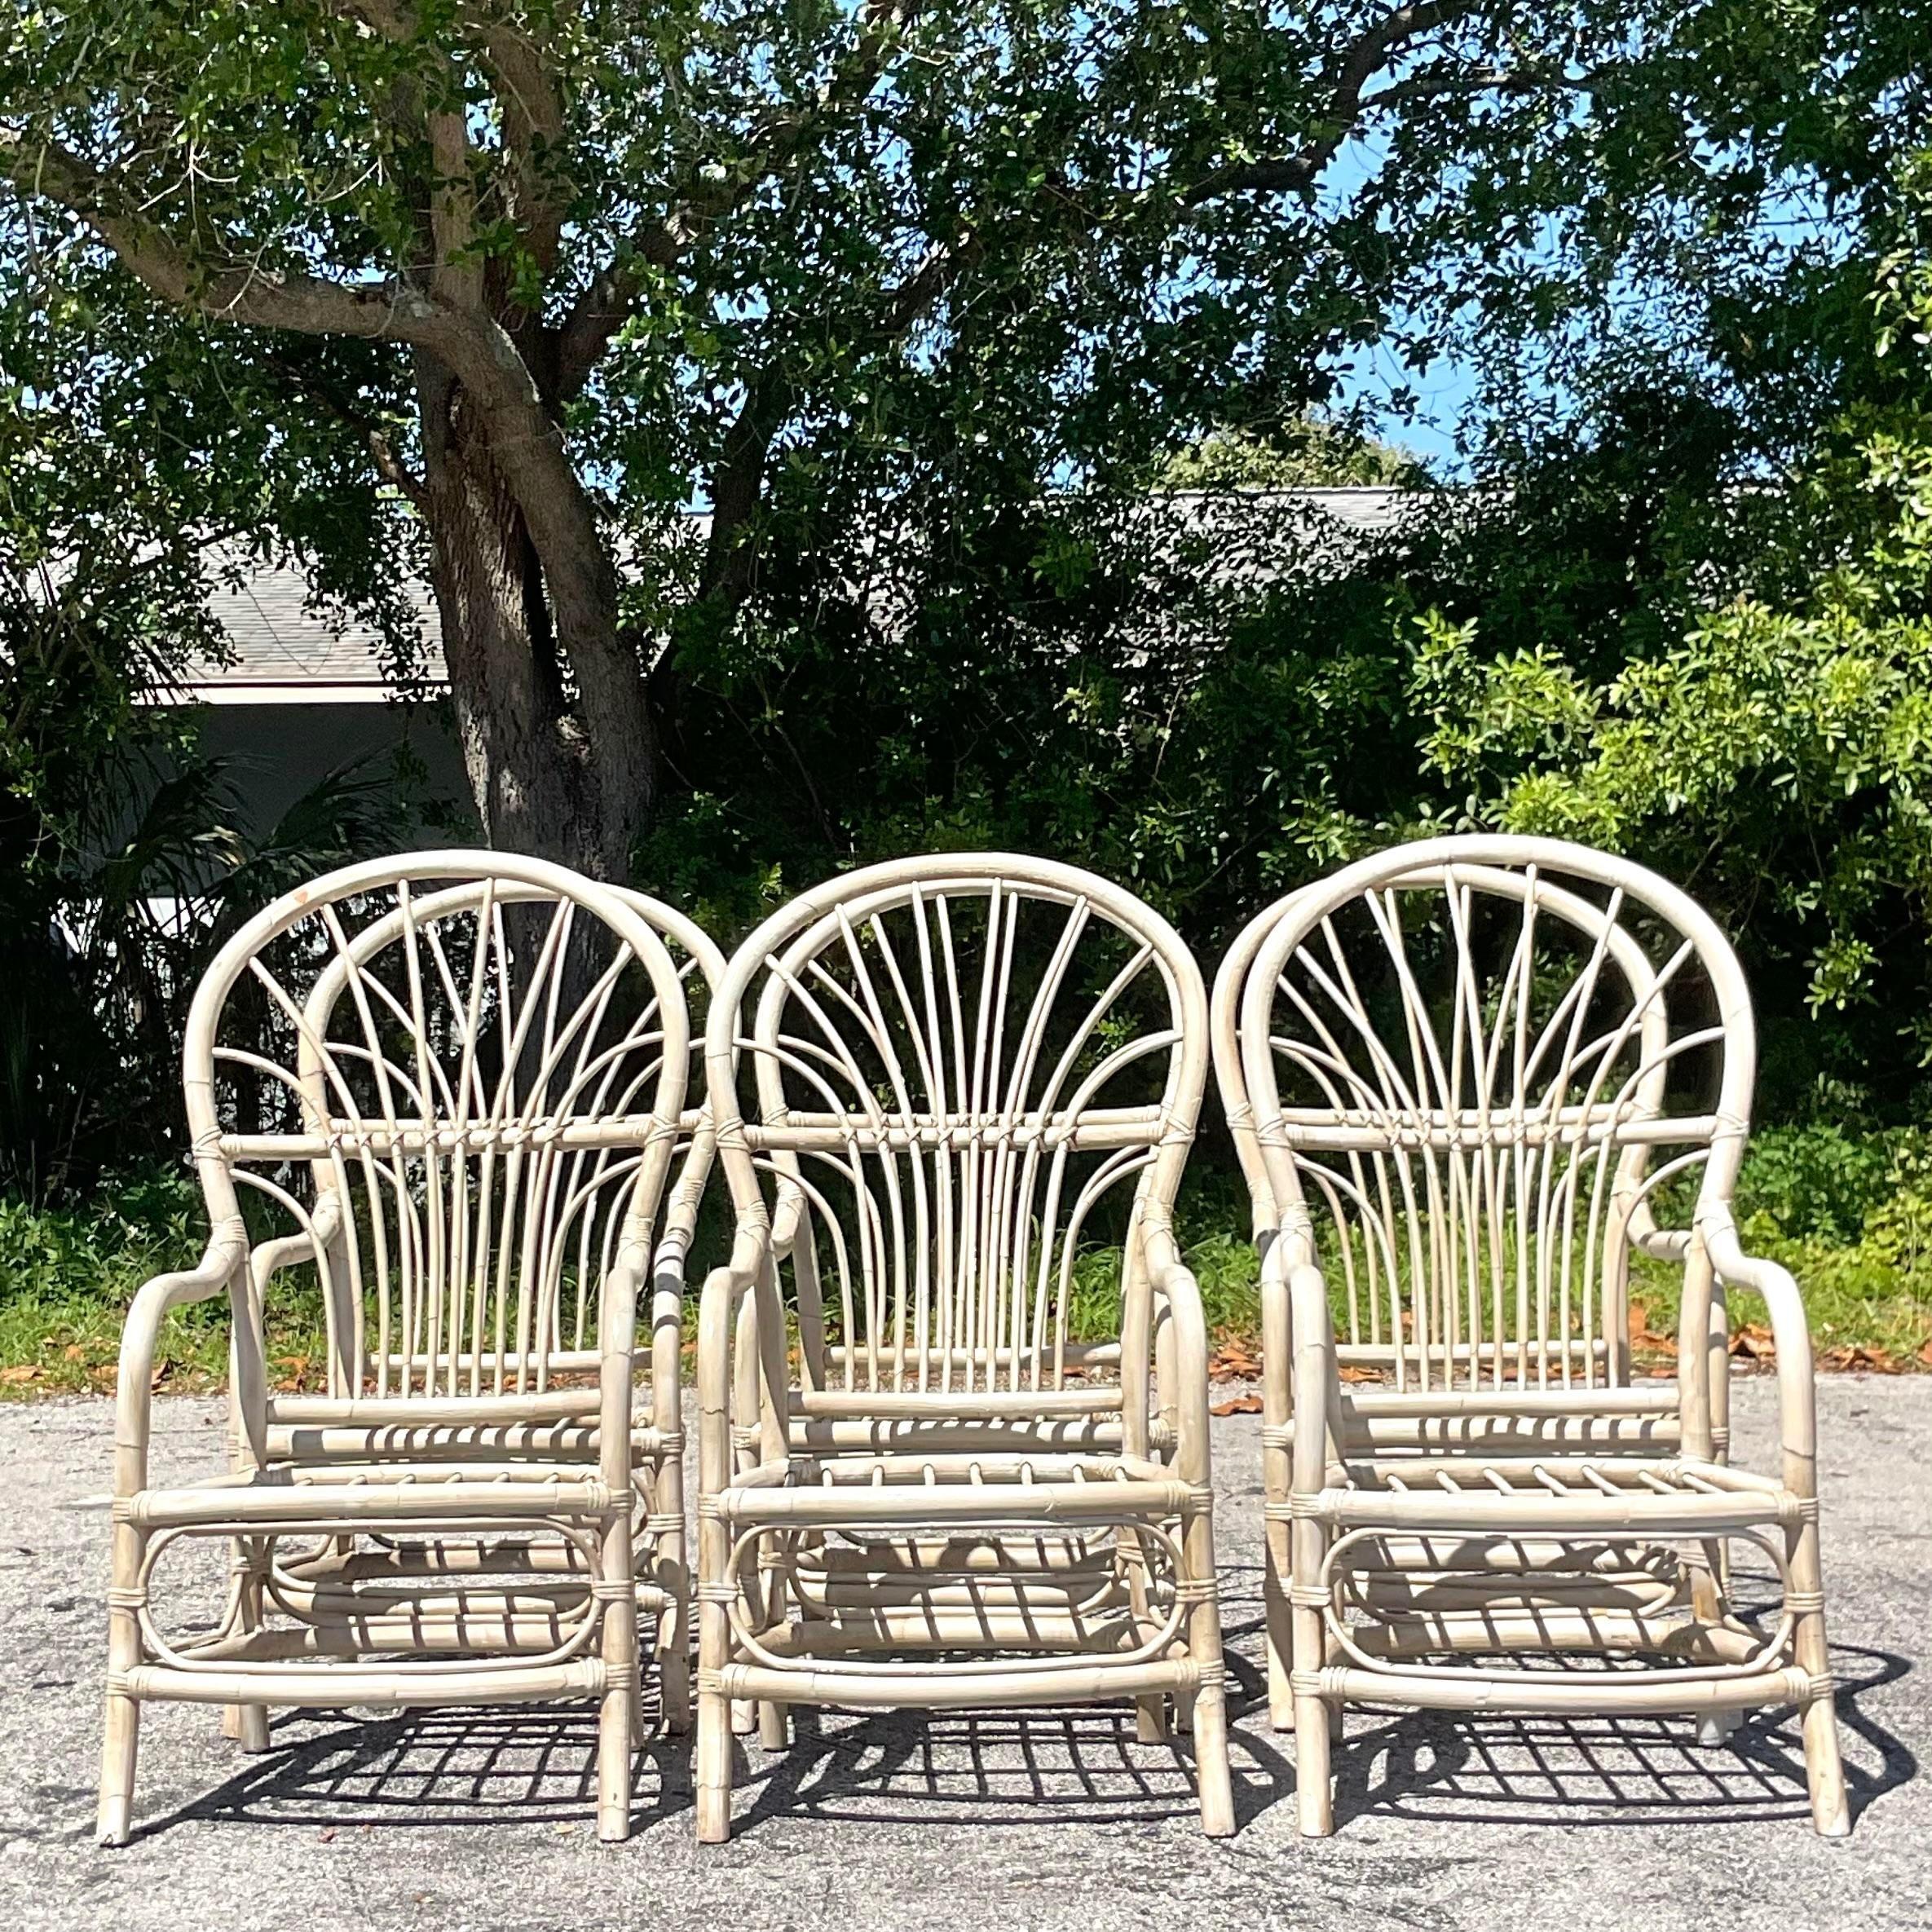 Embrace coastal charm with this set of Vintage High Back Rattan Dining Chairs. Infused with American style, these chairs evoke a sense of relaxed elegance with their classic design and natural rattan construction. Perfect for gatherings and everyday